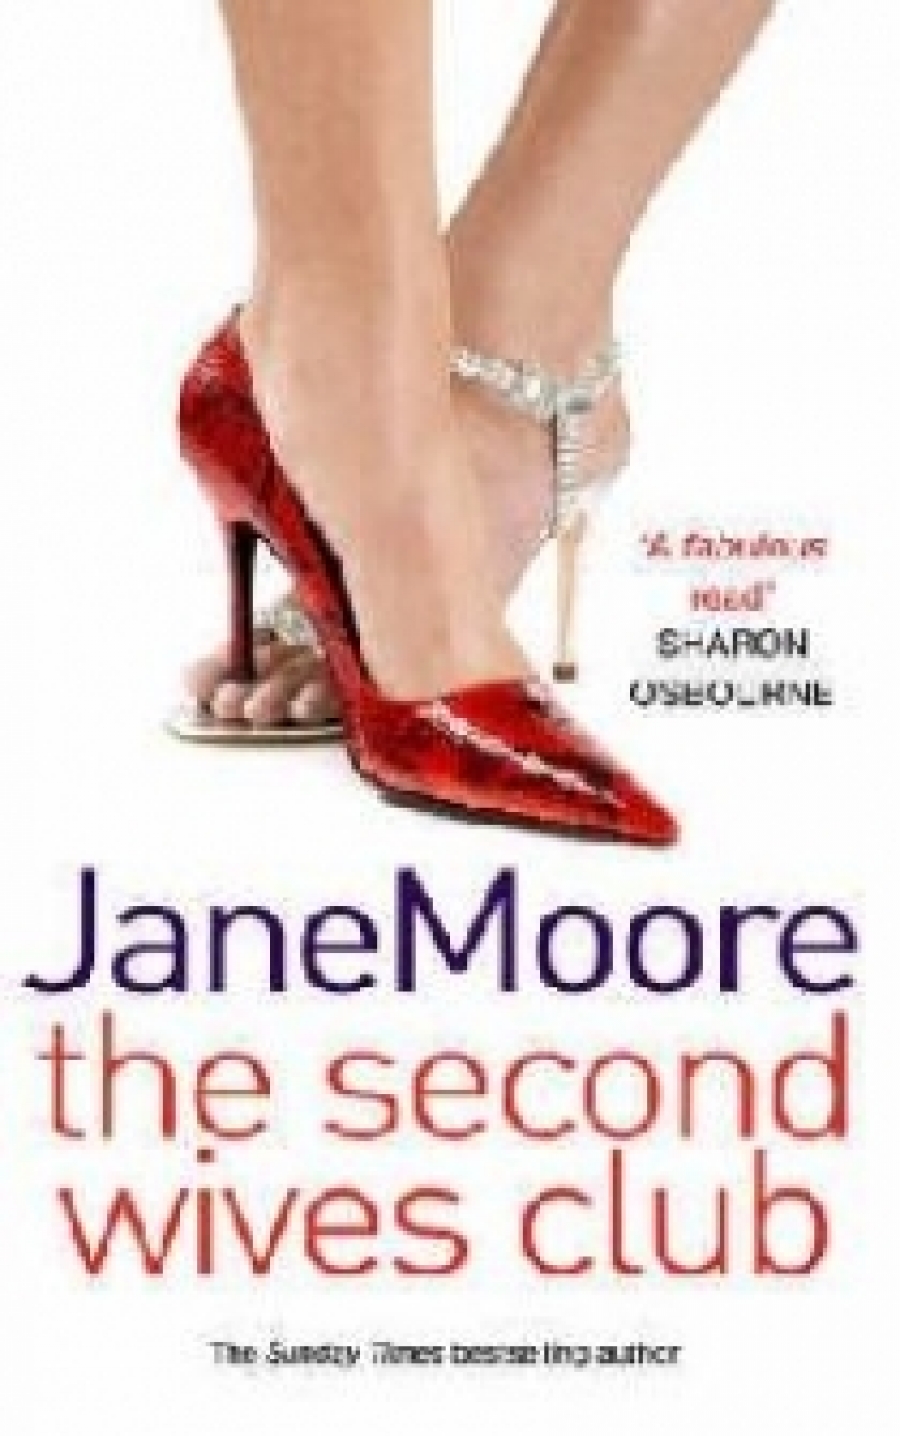 Moore, Jane Second wives club 